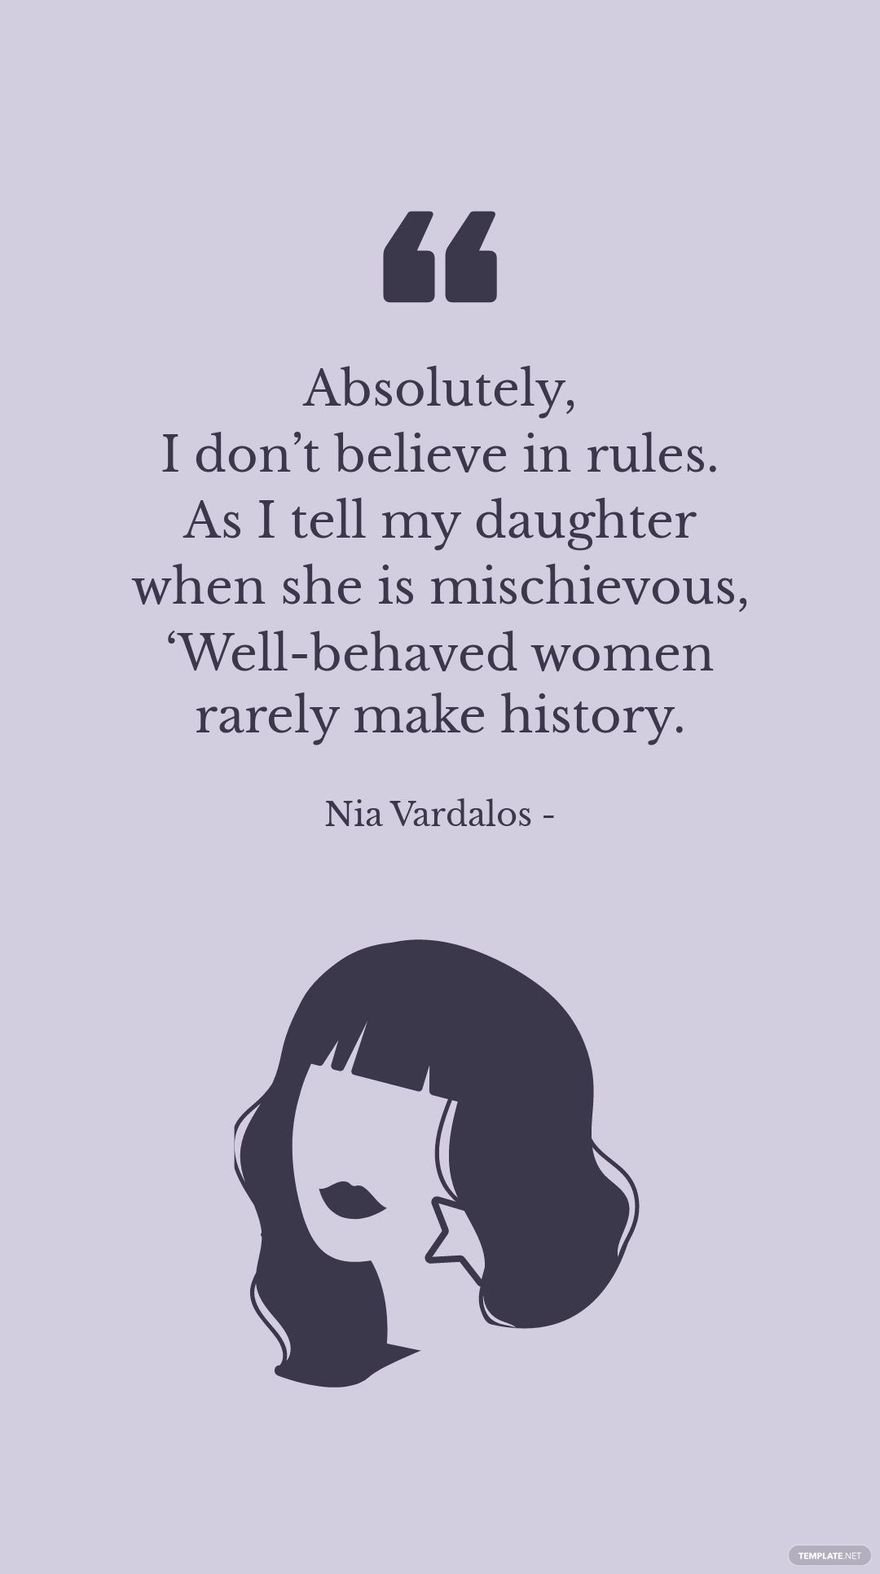 NIA VARDALOS - Absolutely, I don’t believe in rules. As I tell my daughter when she is mischievous, ‘Well-behaved women rarely make history.